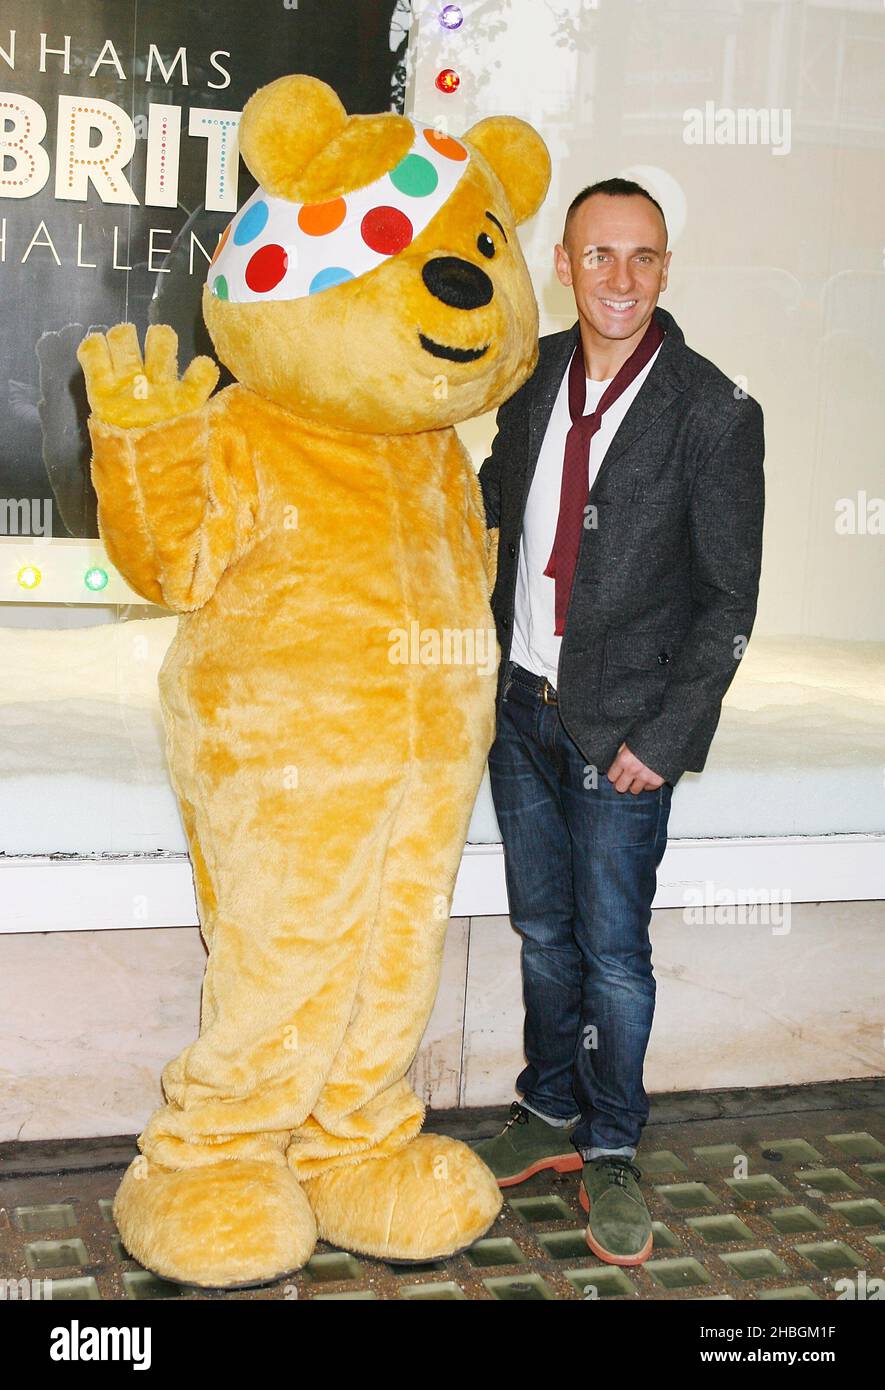 Mark Heyes celebrates the launch of the BBC Children in Need Celebrity Style Challenge in association with Debenhams in the Oxford Street store window. The celebrities have designed a limited edition clothing collection to help raise money for BBC Children in Need. Stock Photo